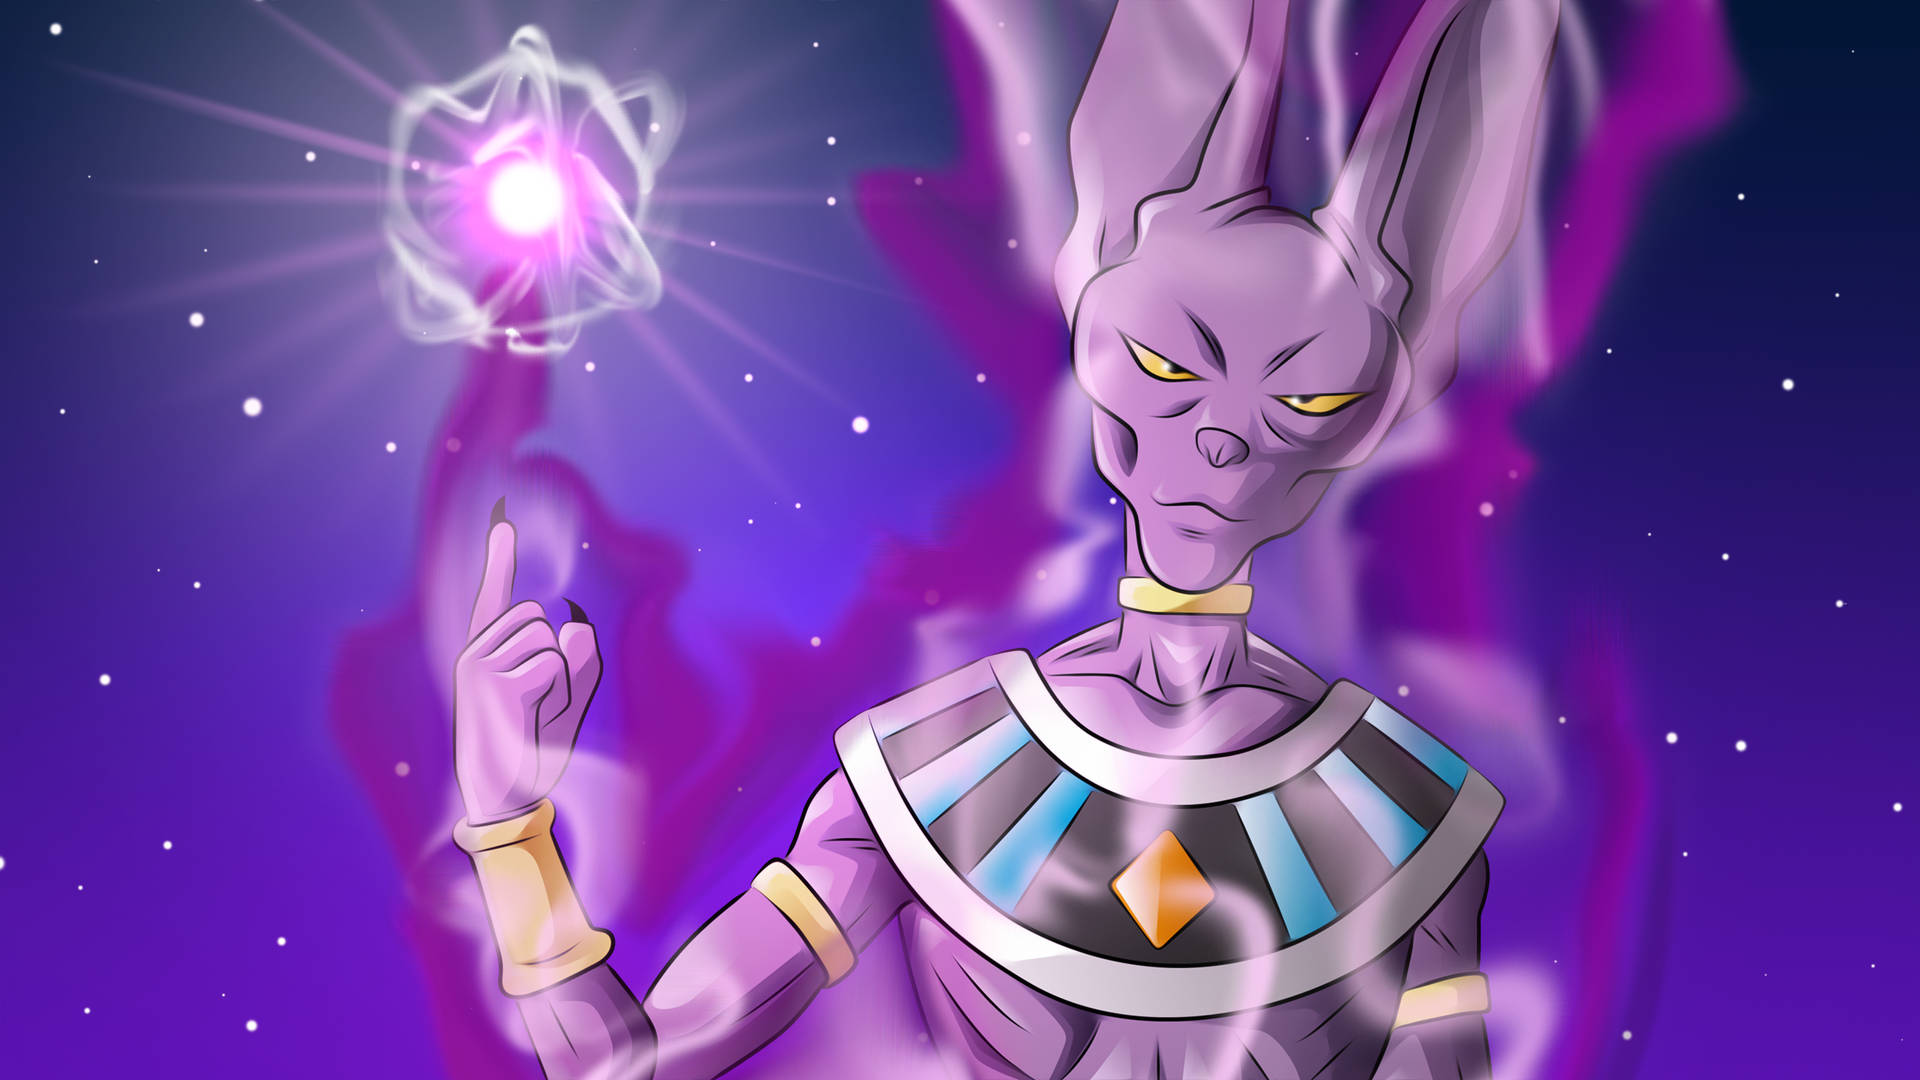 Dragon Ball Z's Beerus Charges Up Background